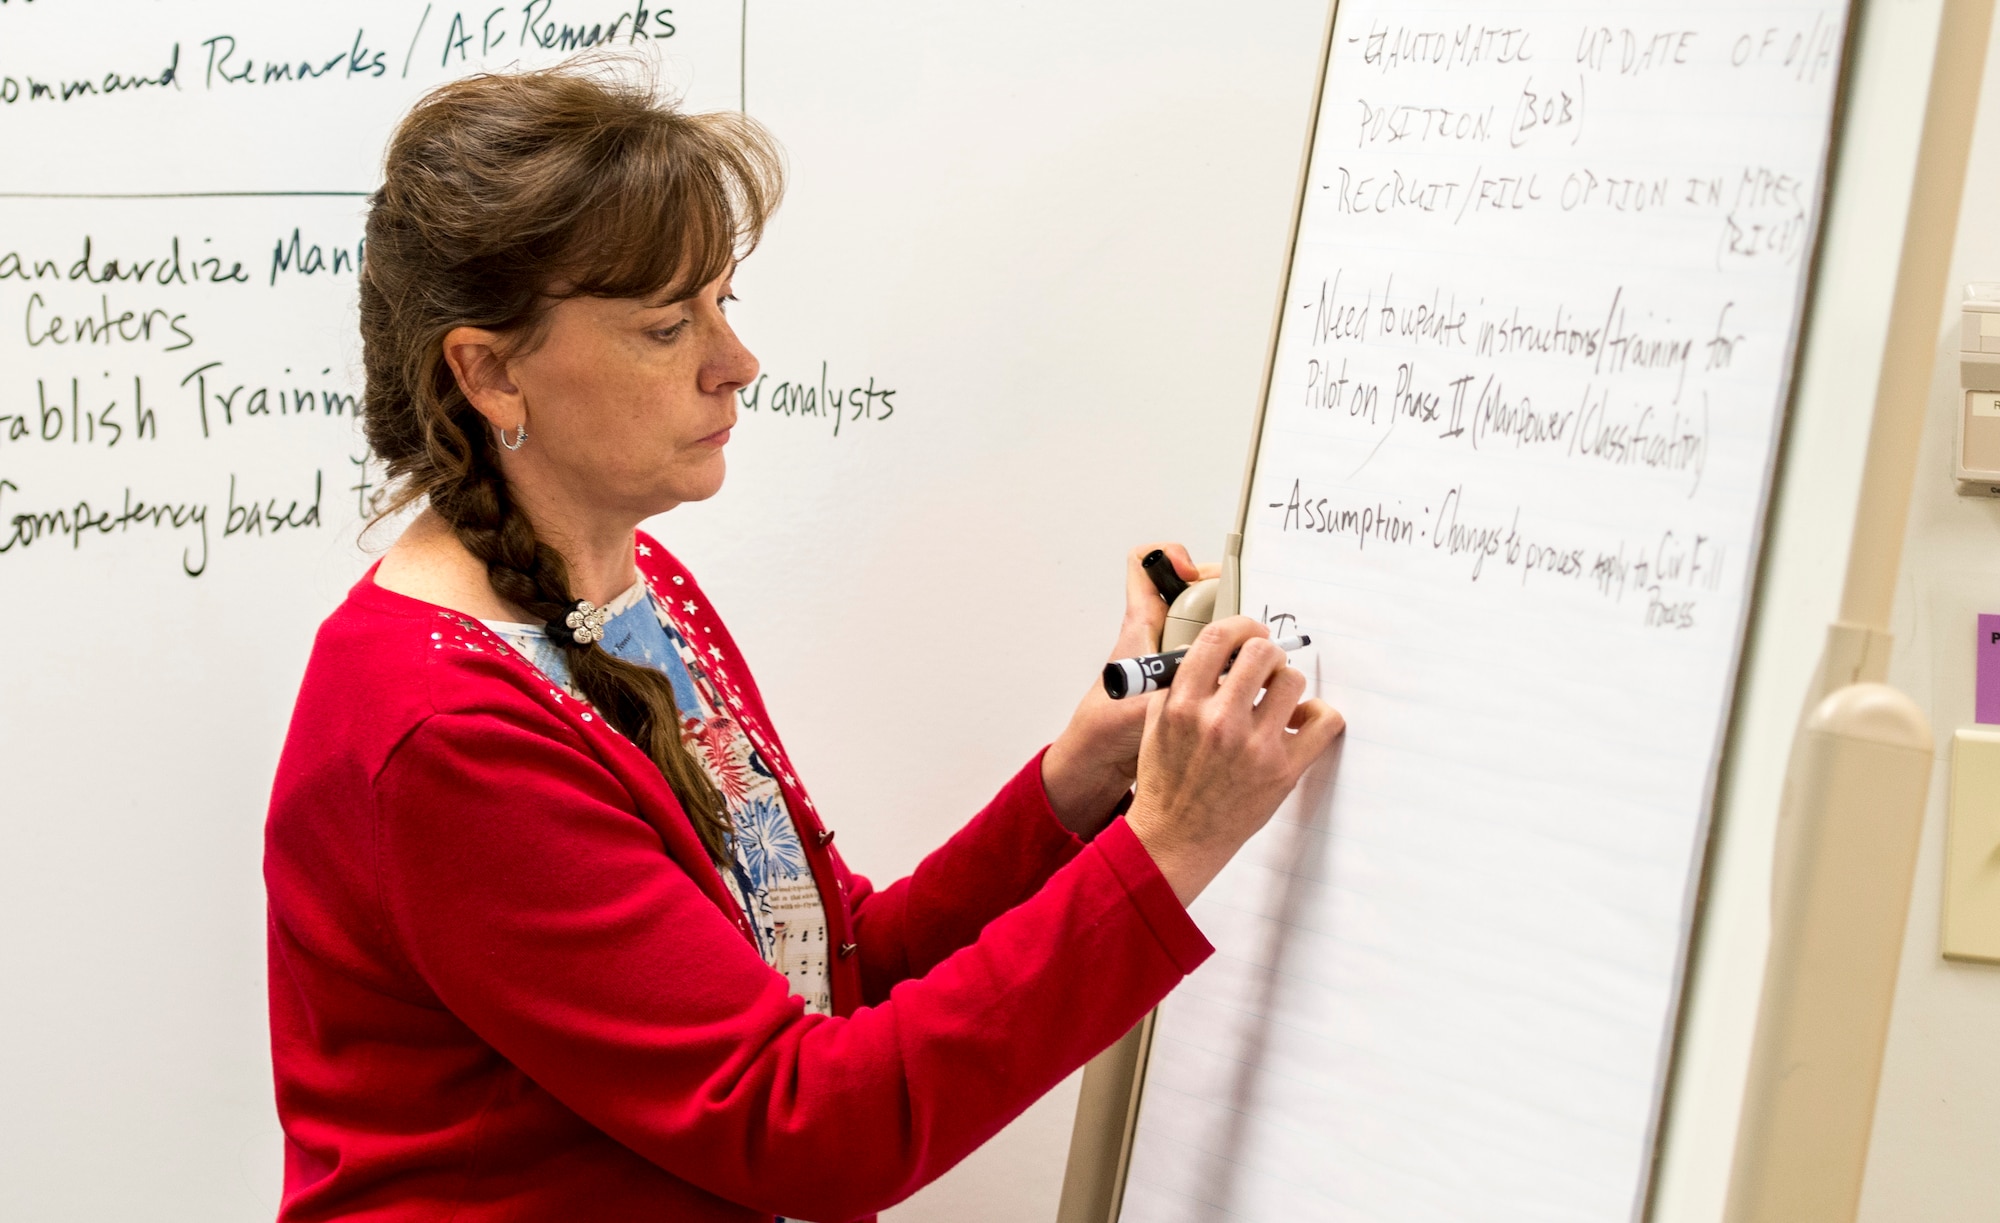 Tammy Lyons, chief of Air Force Materiel Command’s Personnel Support Division, captures the ideas of the group brainstorming for ways to improve the civilian hiring process during a meeting between members of Headquarters AFMC, Headquarters Air Force Personnel Center, installation civilian personnel offices and Directorate of Personnel employees within AFMC, July 22, 2015. They also discussed and identified inefficiencies and duplications of the current process which should be addressed. (U.S. Air Force photo by Wesley Farnsworth)